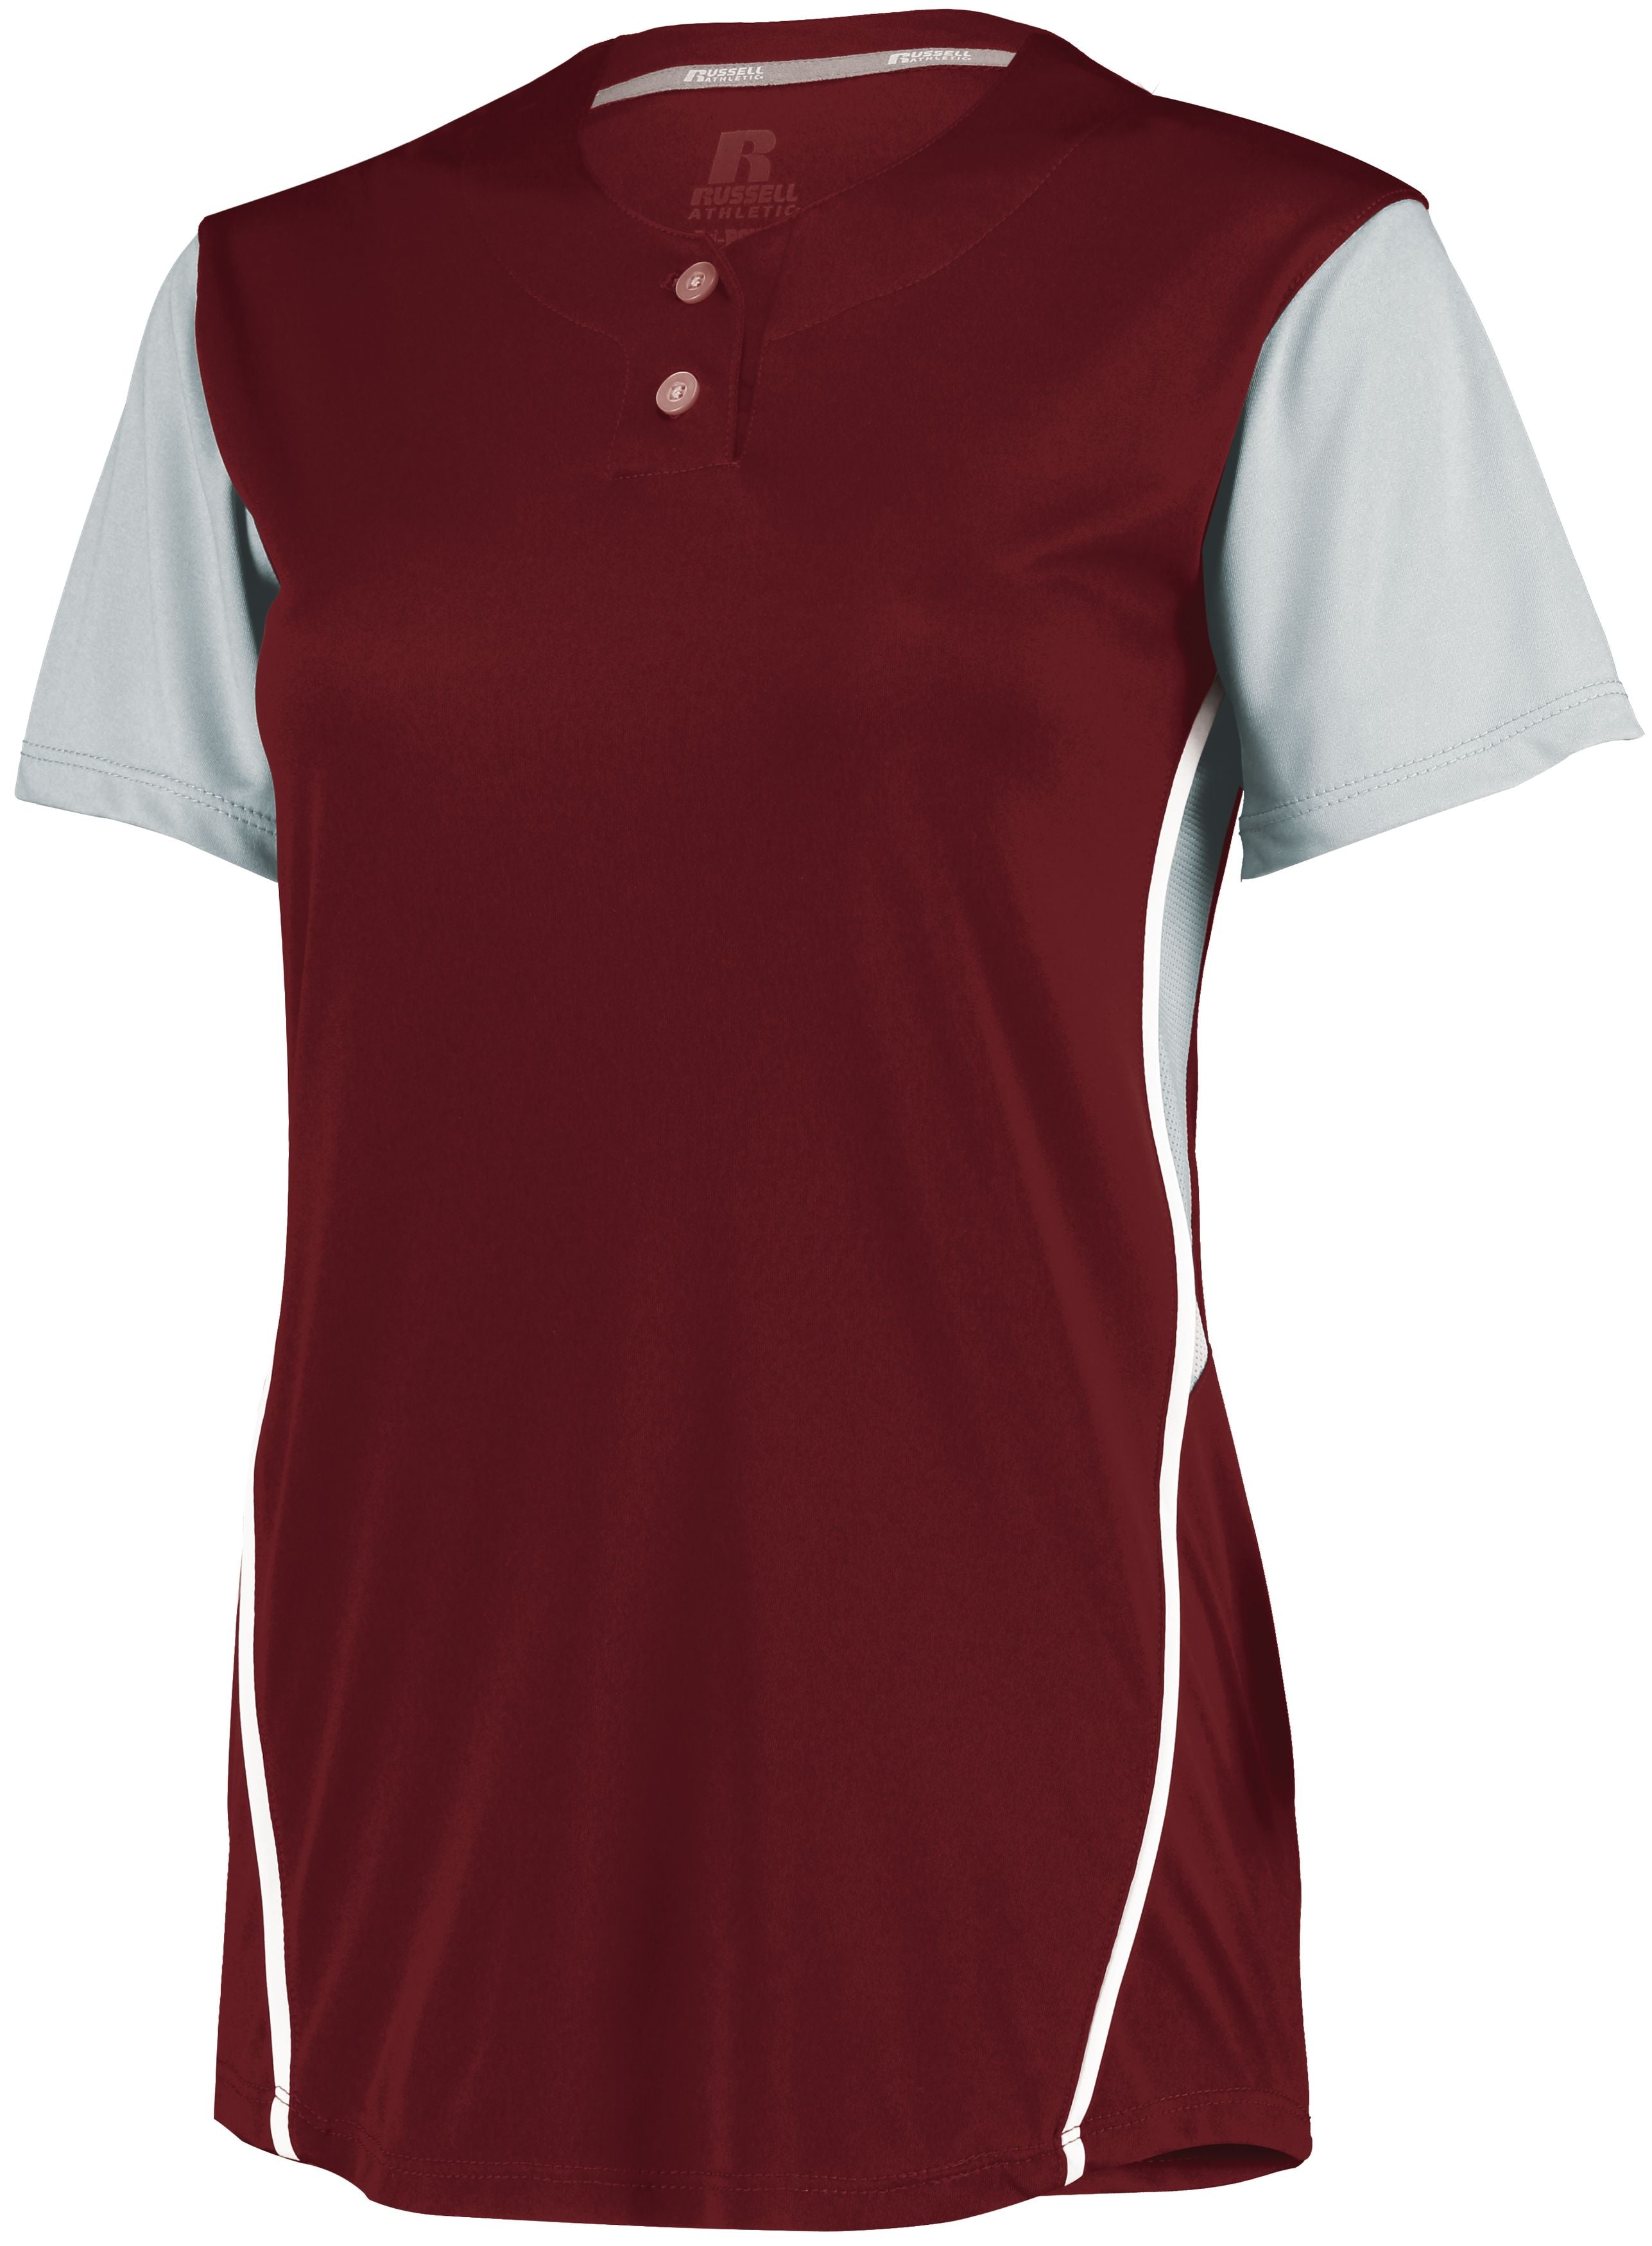 Russell Athletic Ladies Performance Two-Button Color Block Jersey in Cardinal/Baseball Grey  -Part of the Ladies, Ladies-Jersey, Softball, Russell-Athletic-Products, Shirts product lines at KanaleyCreations.com